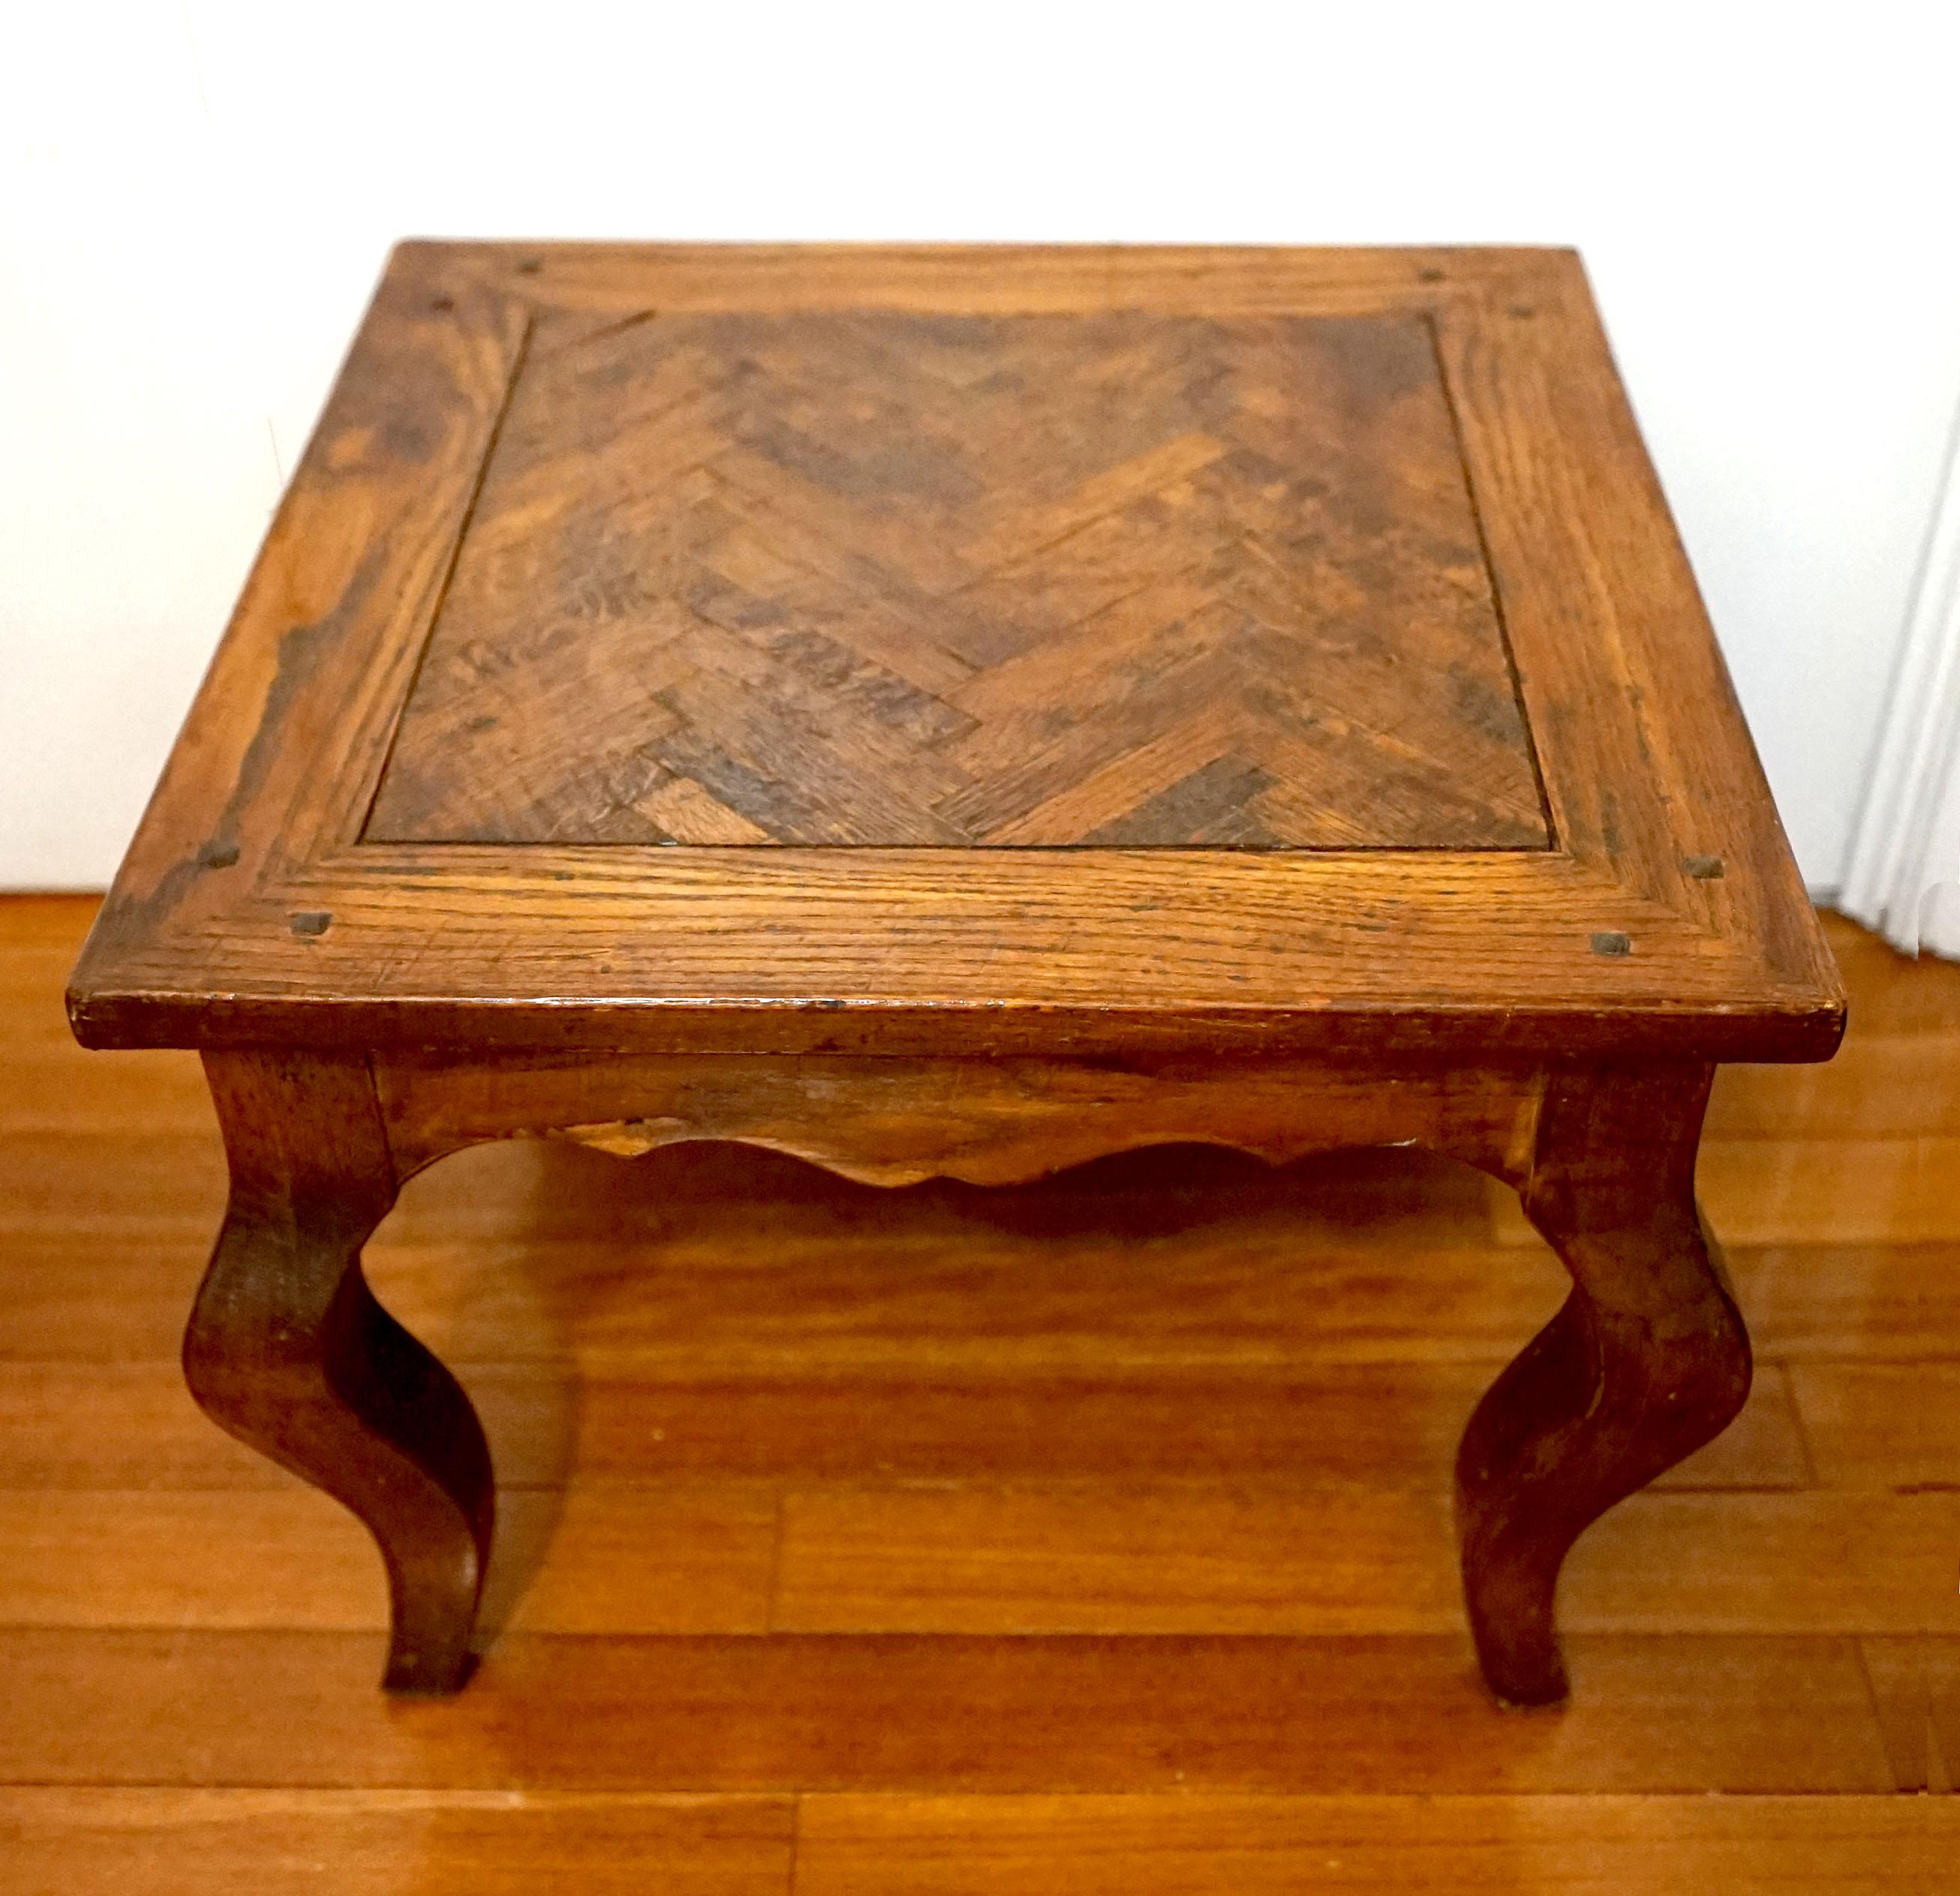 1900 Regence Herringbone Inset Parquetry Oak Table with Cabriole Legs 4